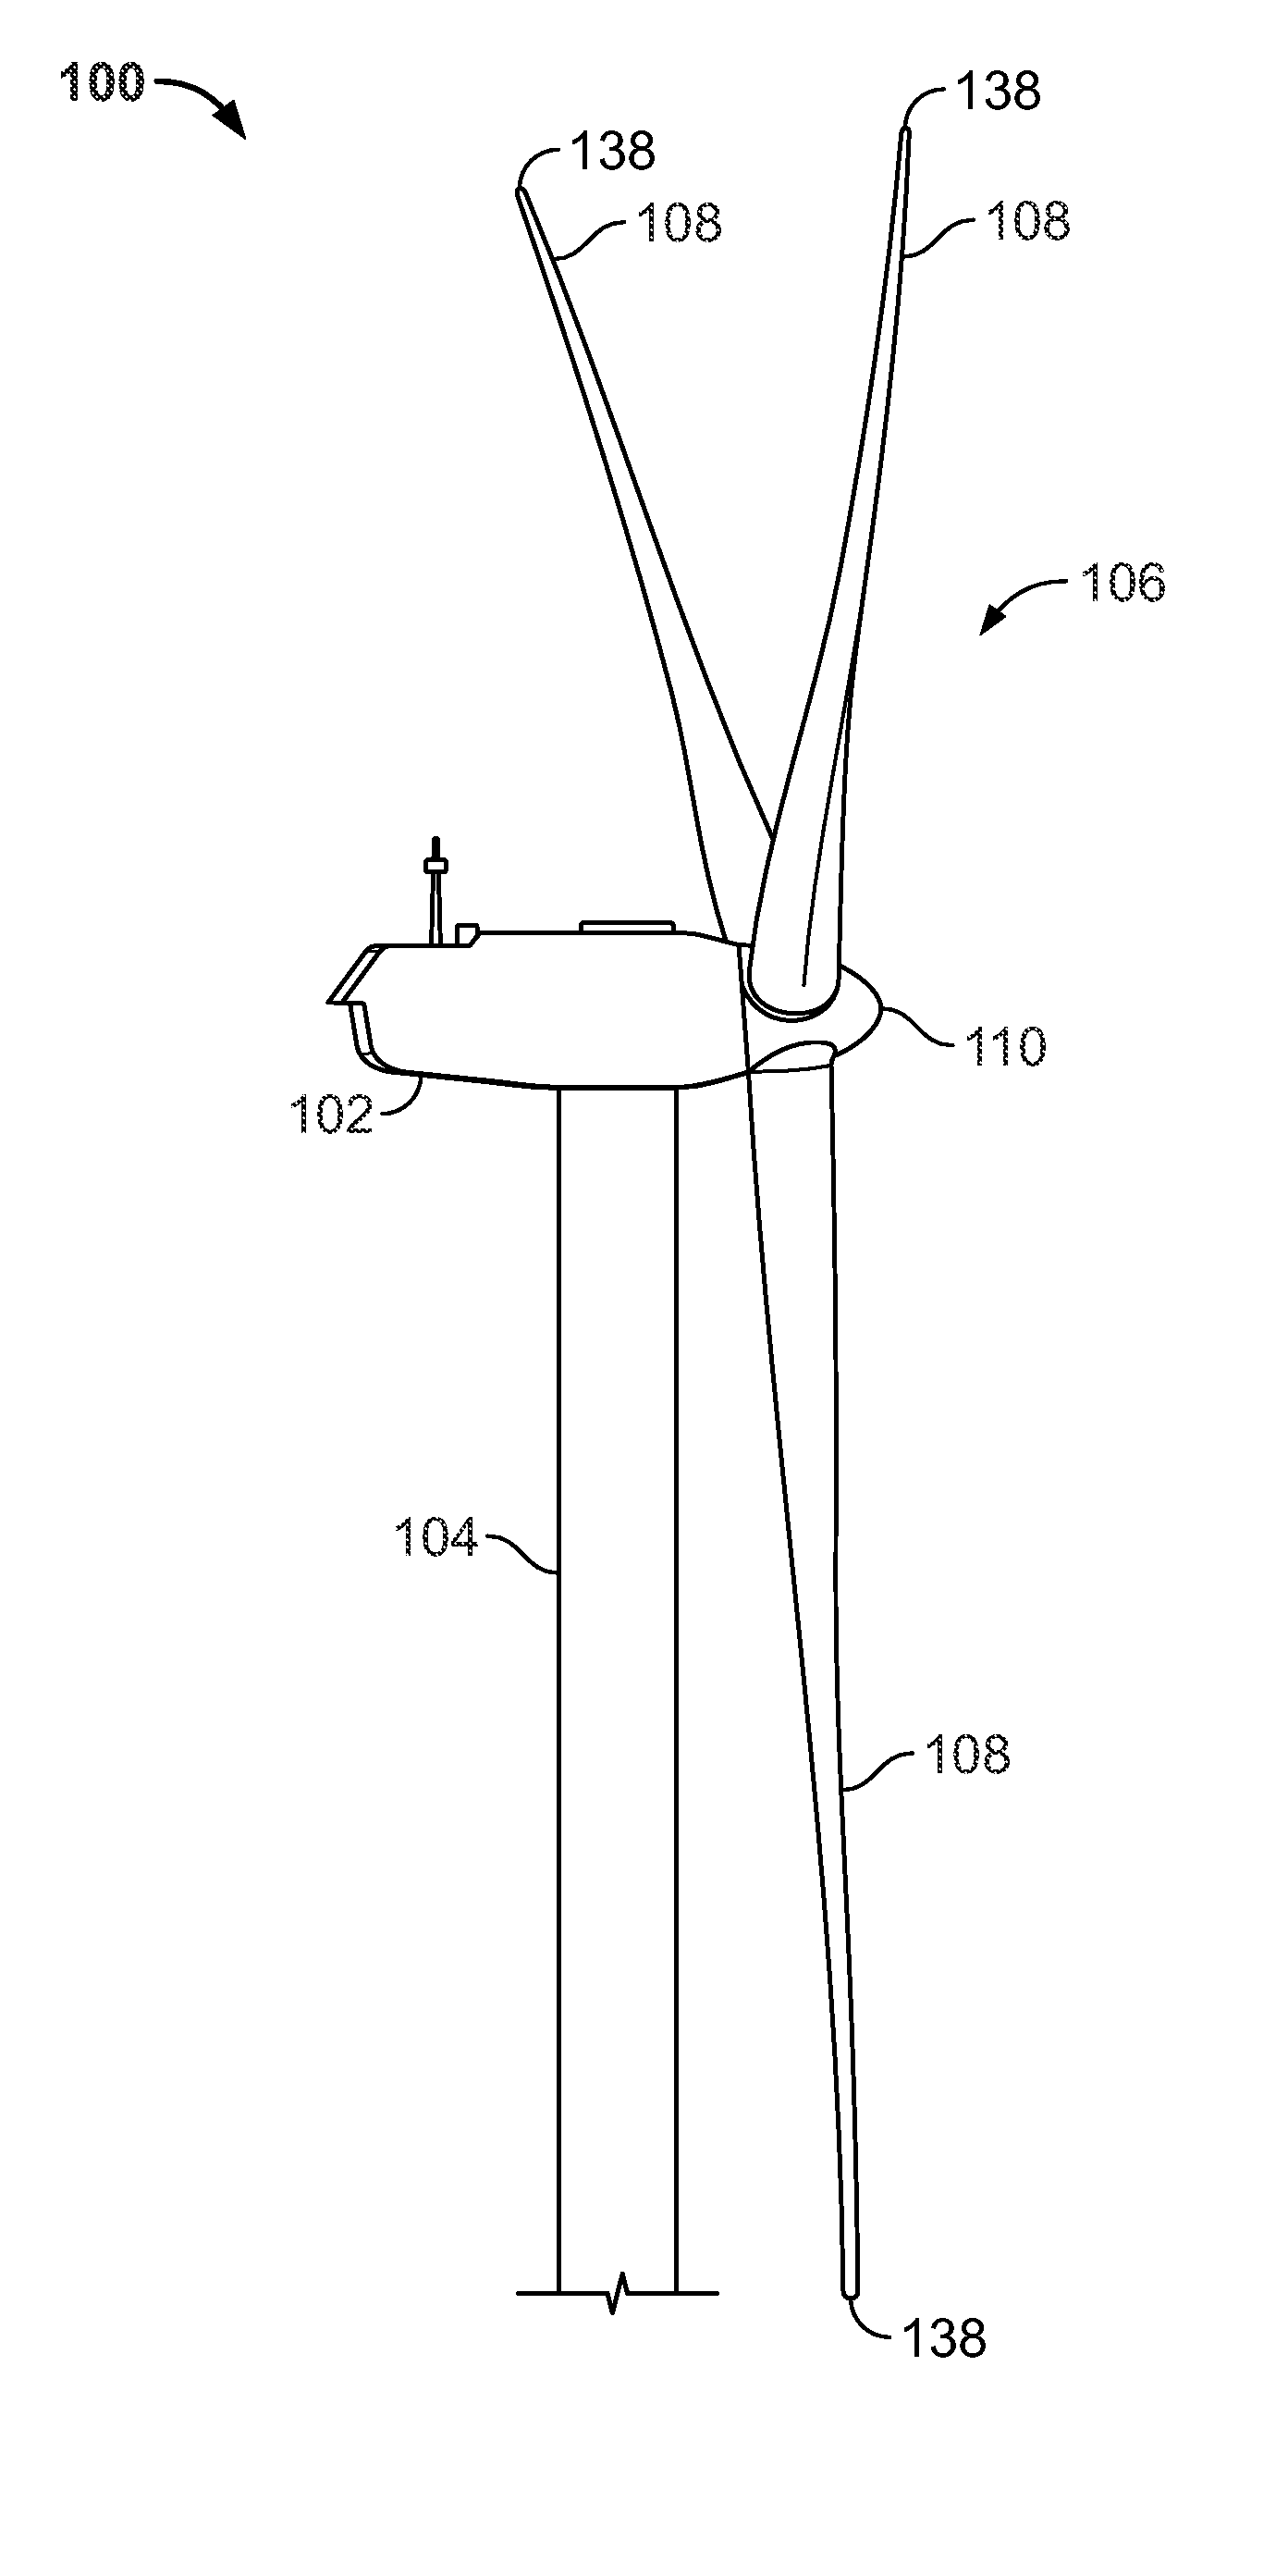 Variable tip speed ratio tracking control for wind turbines